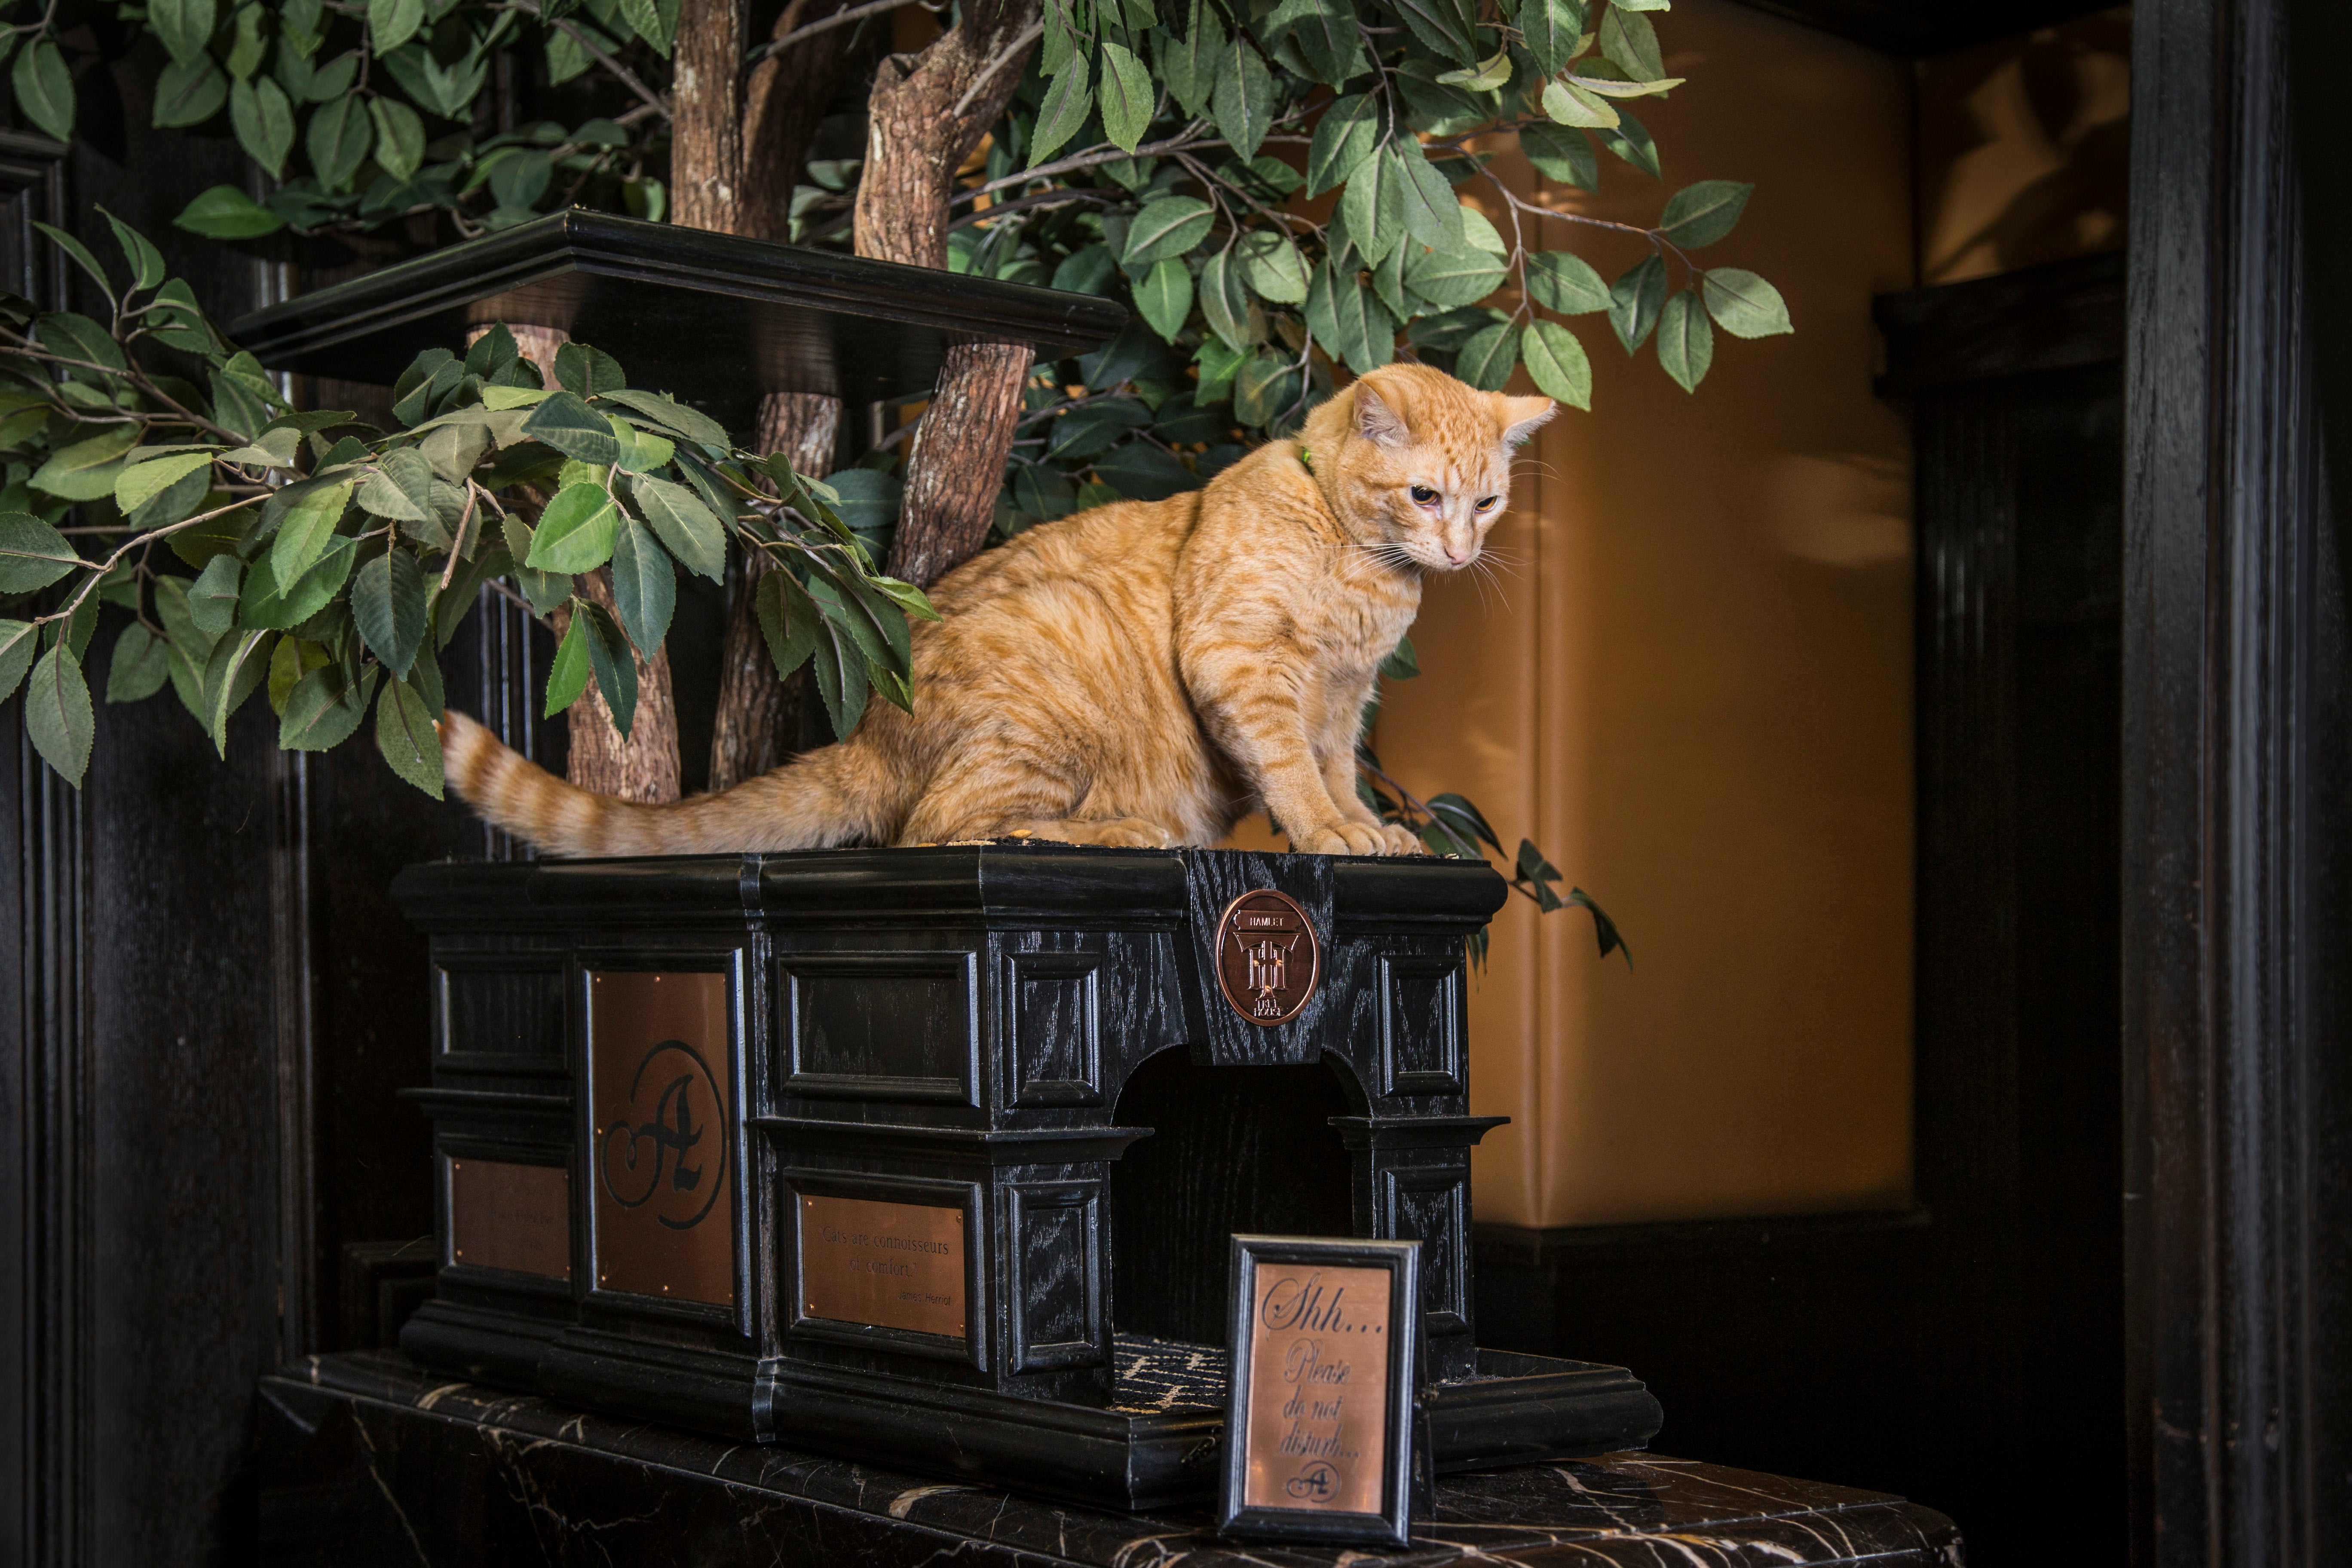 Hamlet the Eighth is one in a long line of Algonquin cats